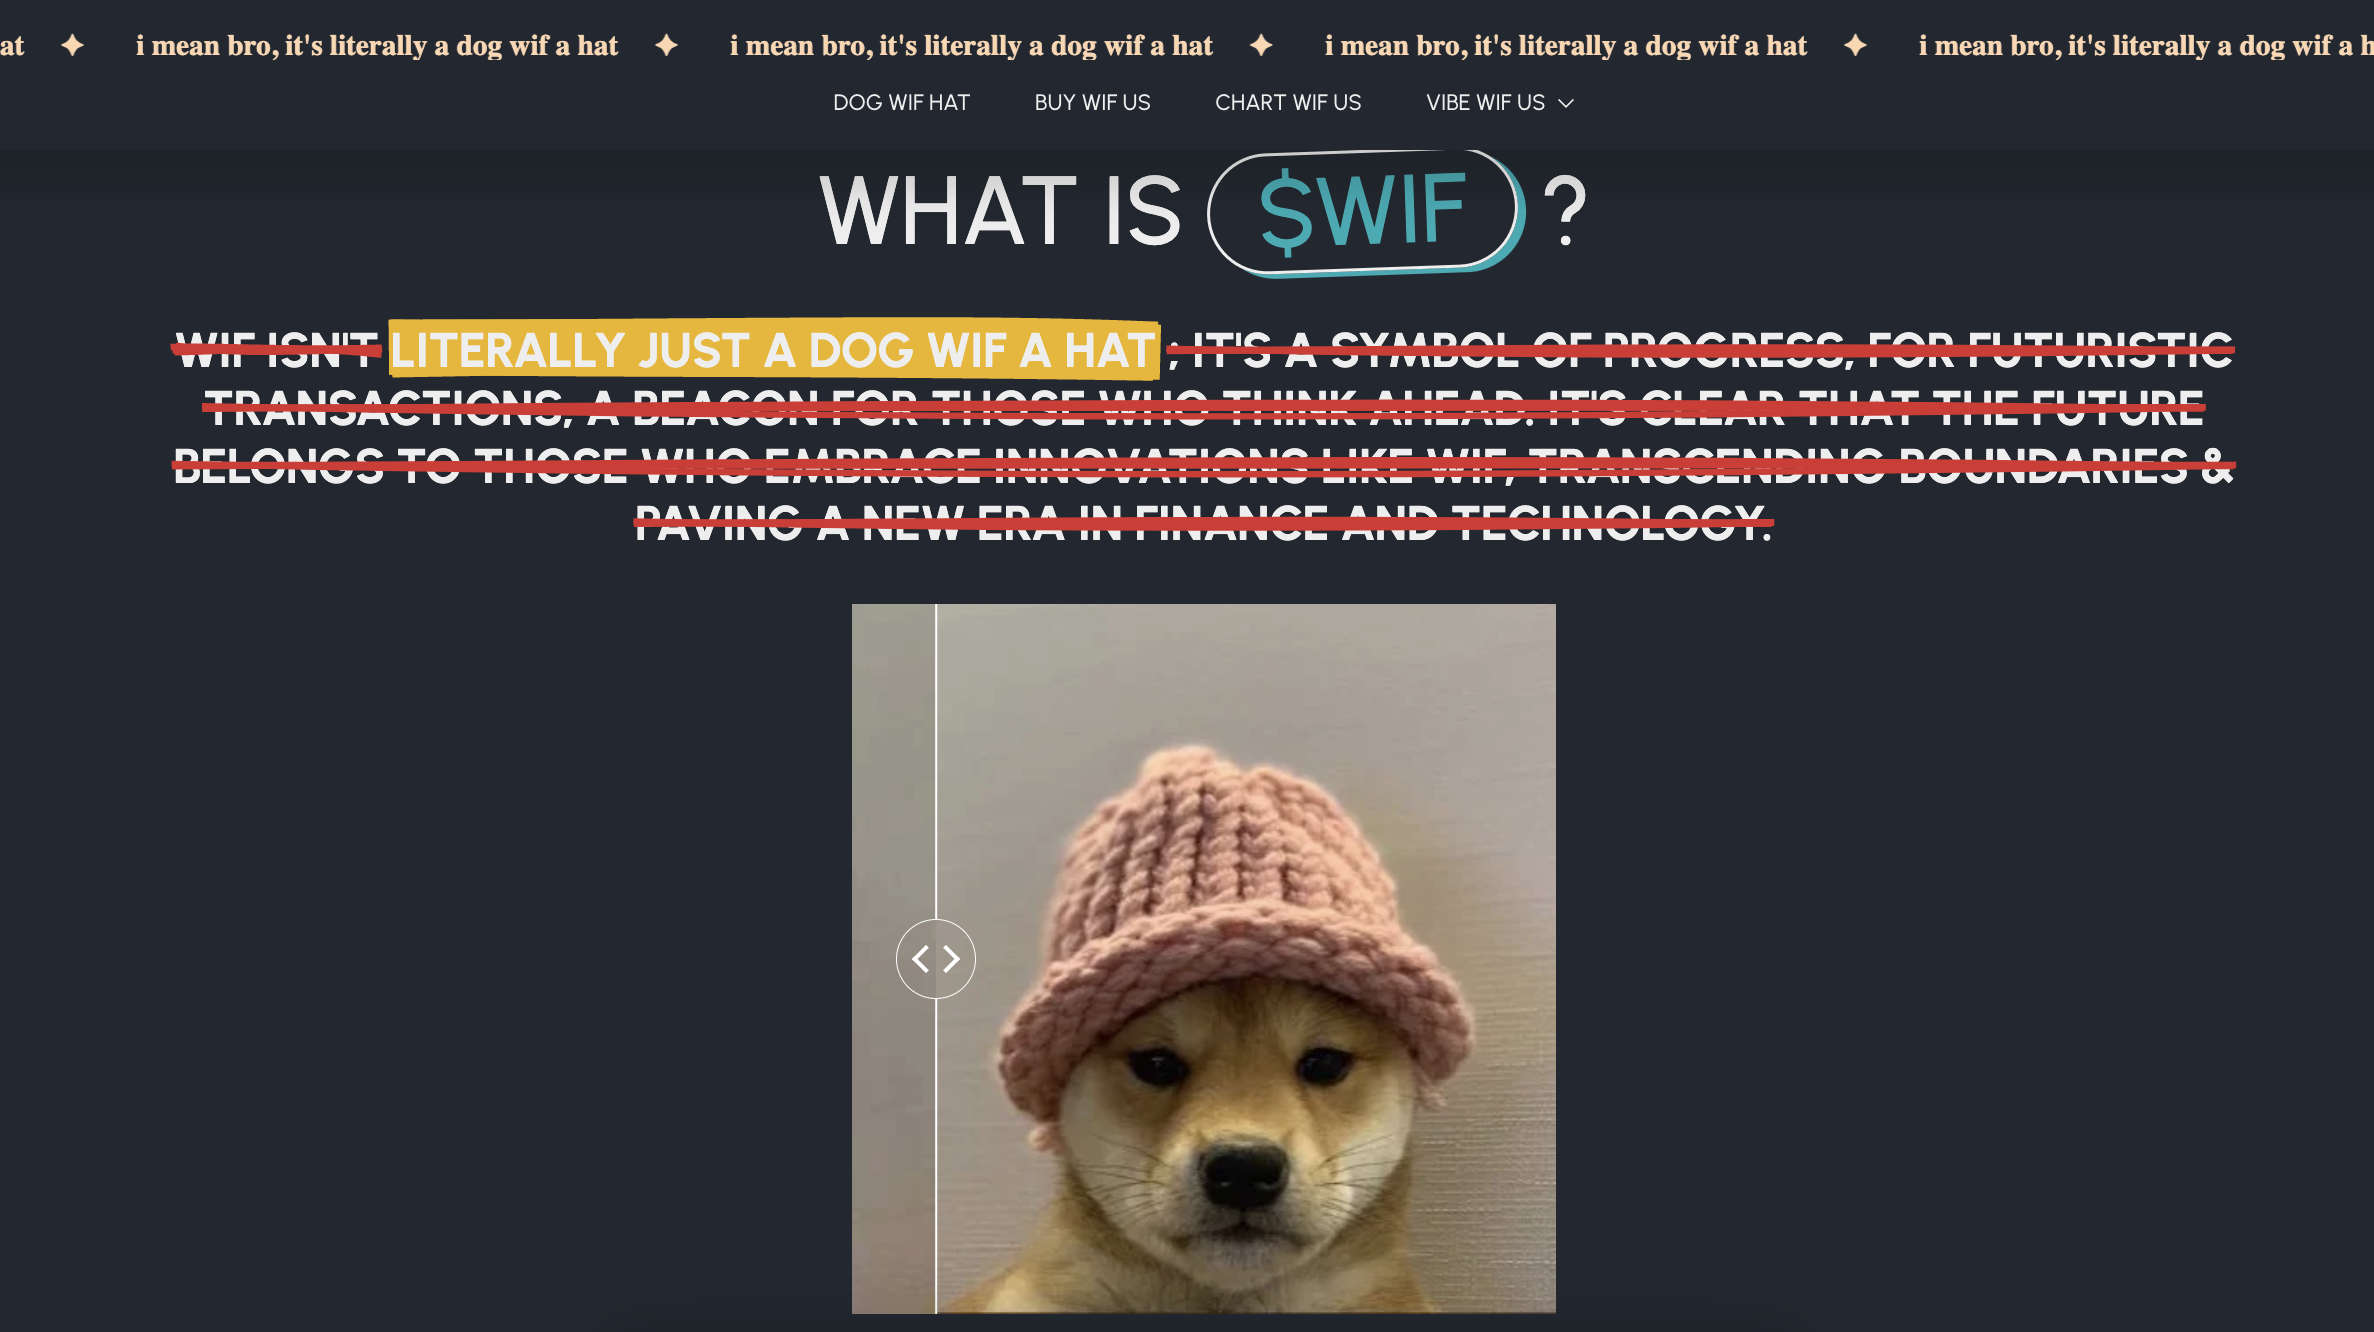 what is dogwifhat?